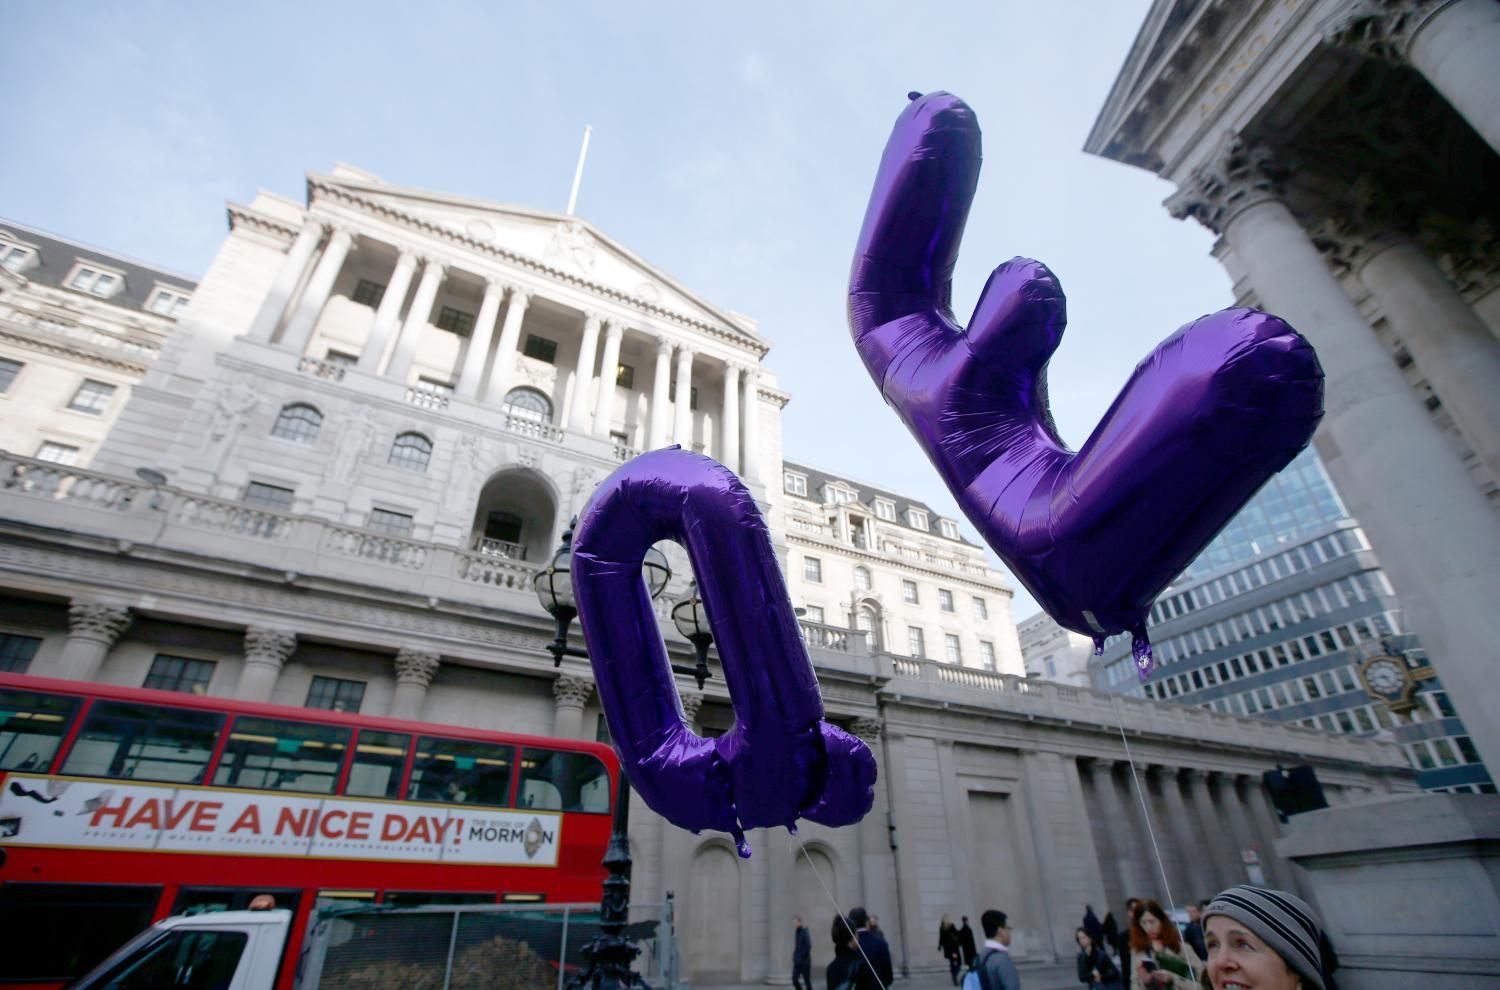 Supporters of Positive Money hold up balloons in front of the Bank of England during a demonstration to demand quantitative easing which favours people instead of large financial institutions, in the City of London, in Britain November 3, 2016. REUTERS/Peter Nicholls - LR1ECB30V9J9T